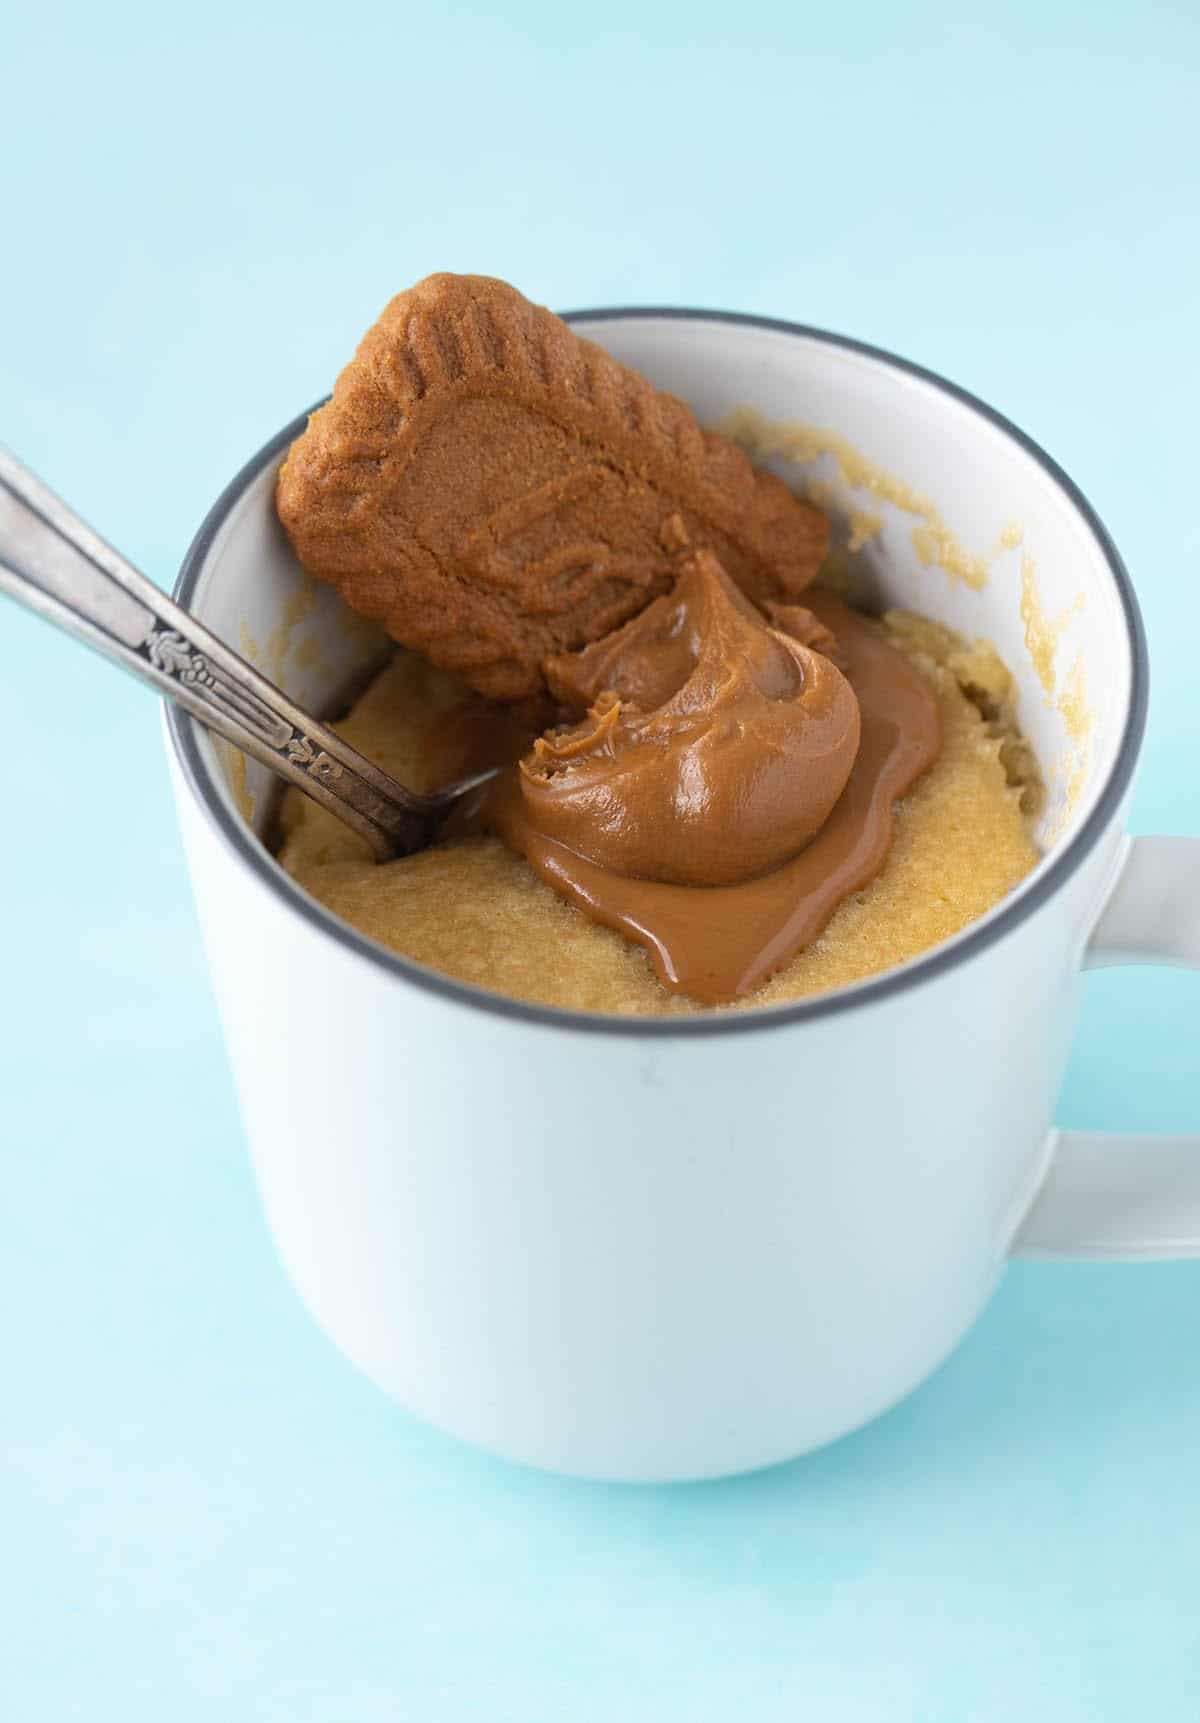 Gooey Biscoff Mug Cake topped with Lotus Biscoff Cookies